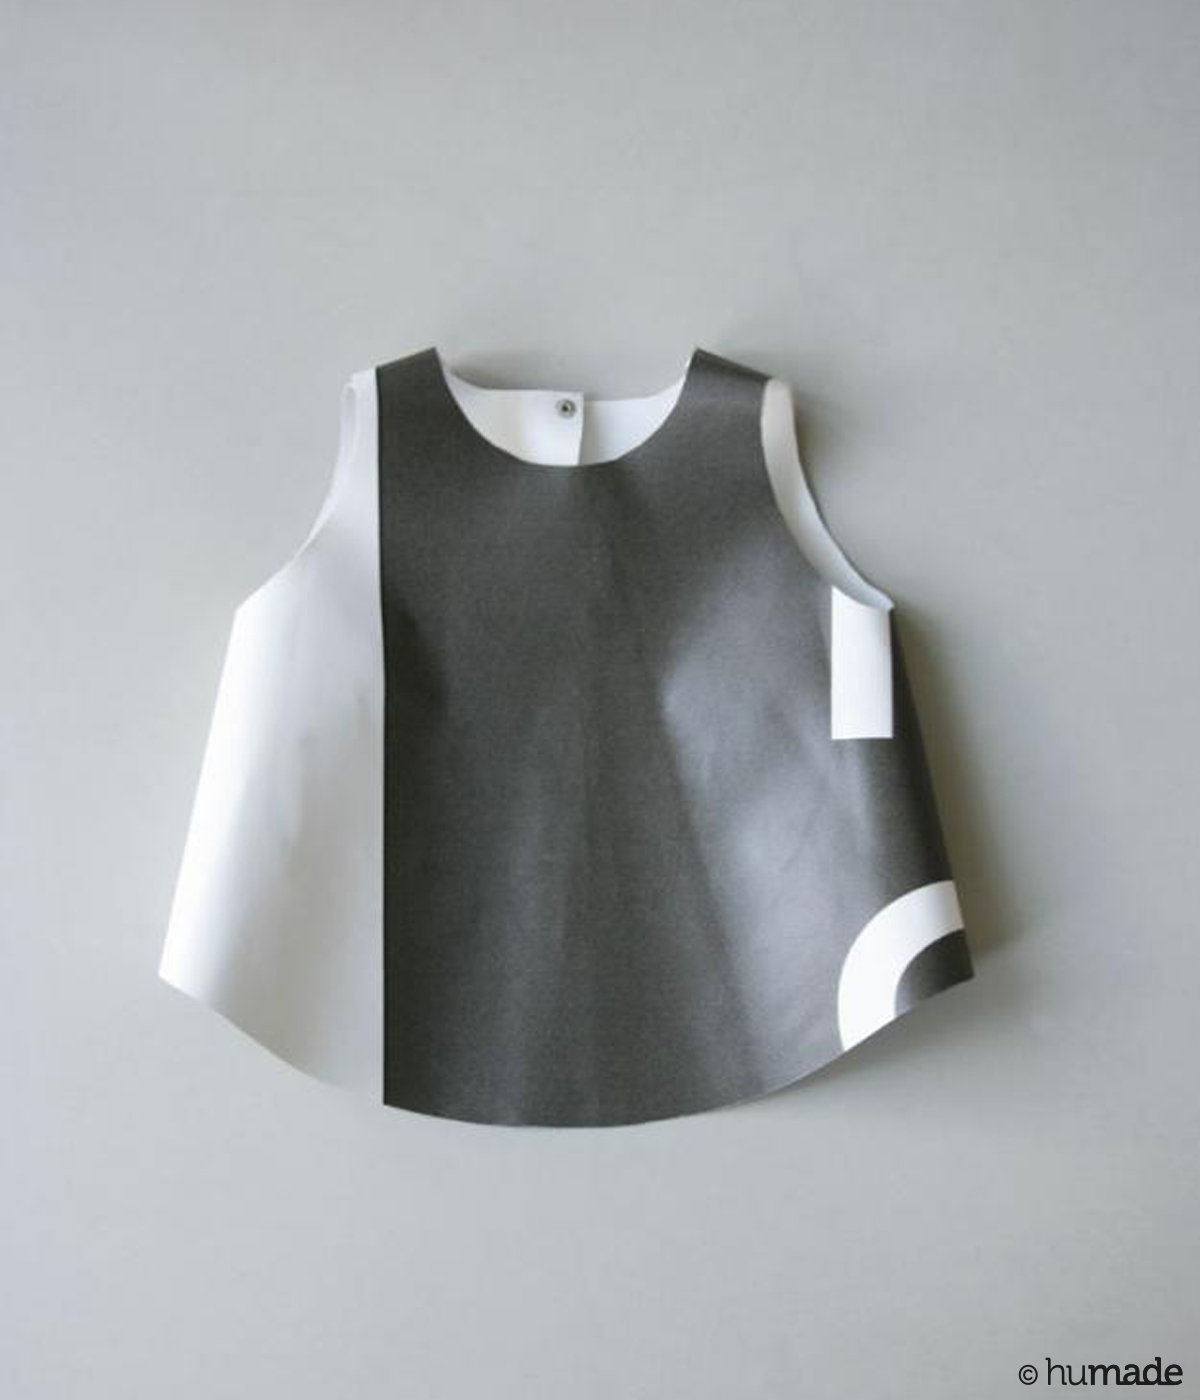 Apron - These childrens aprons are made for small baking and gardening boys and girls. The super strong apro...